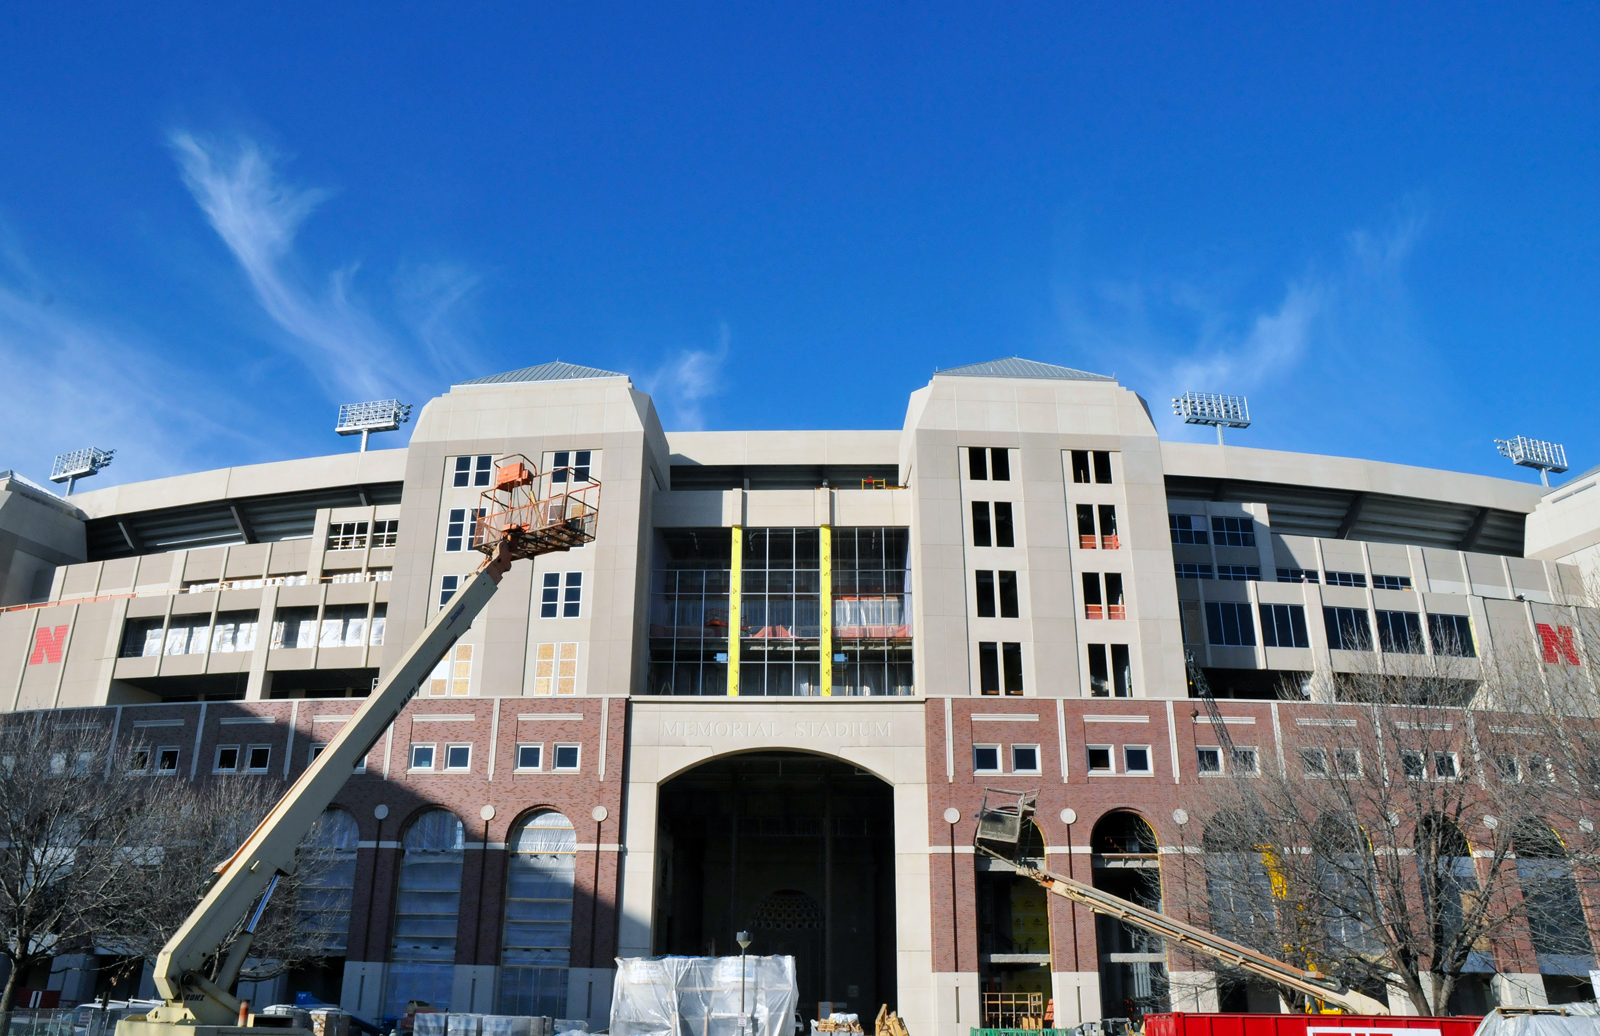 On Jan. 25, the NU Board of Regents approved the Center for Brain, Biology and Behavior as an interdisciplinary center at UNL. The center will be housed within Memorial Stadium's East Stadium expansion.  